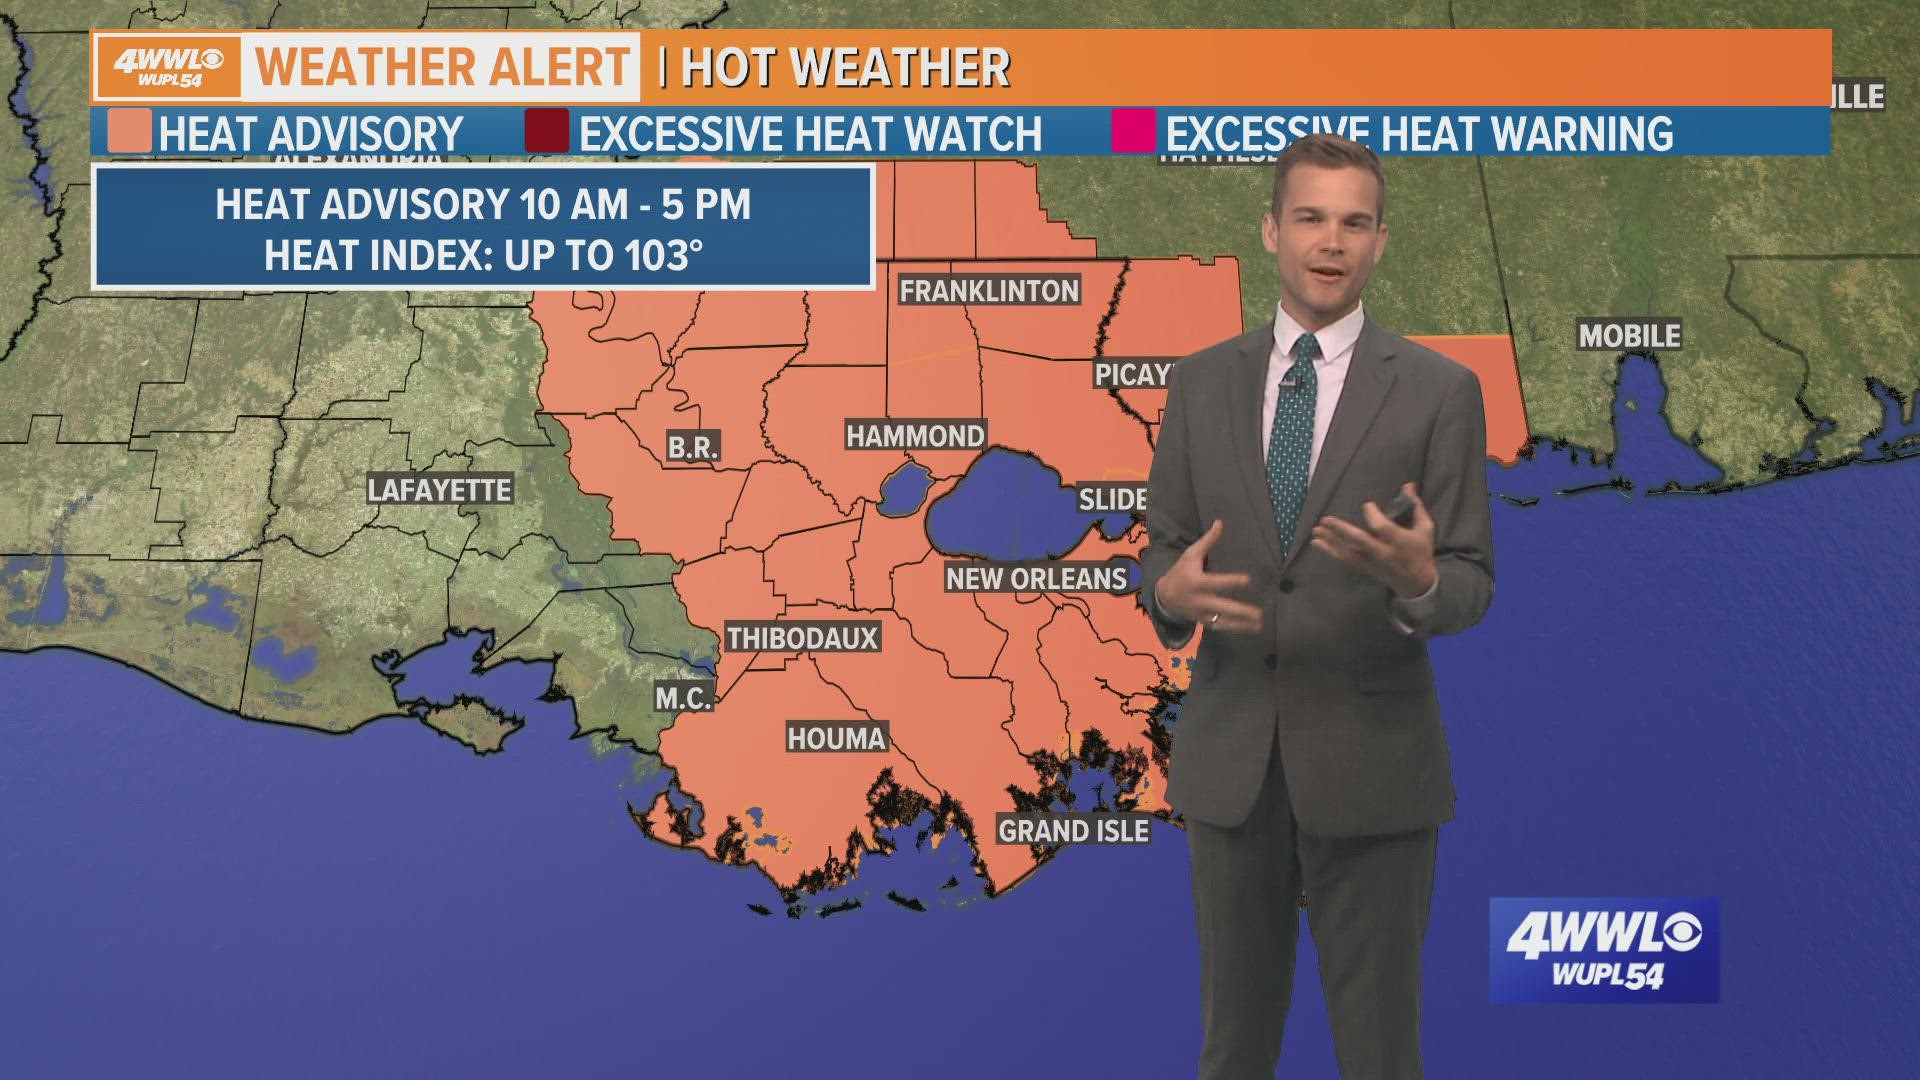 Meteorologist Payton Malone says the conditions in southeast Louisiana wouldn't normally call for a heat advisory but the situation is different.